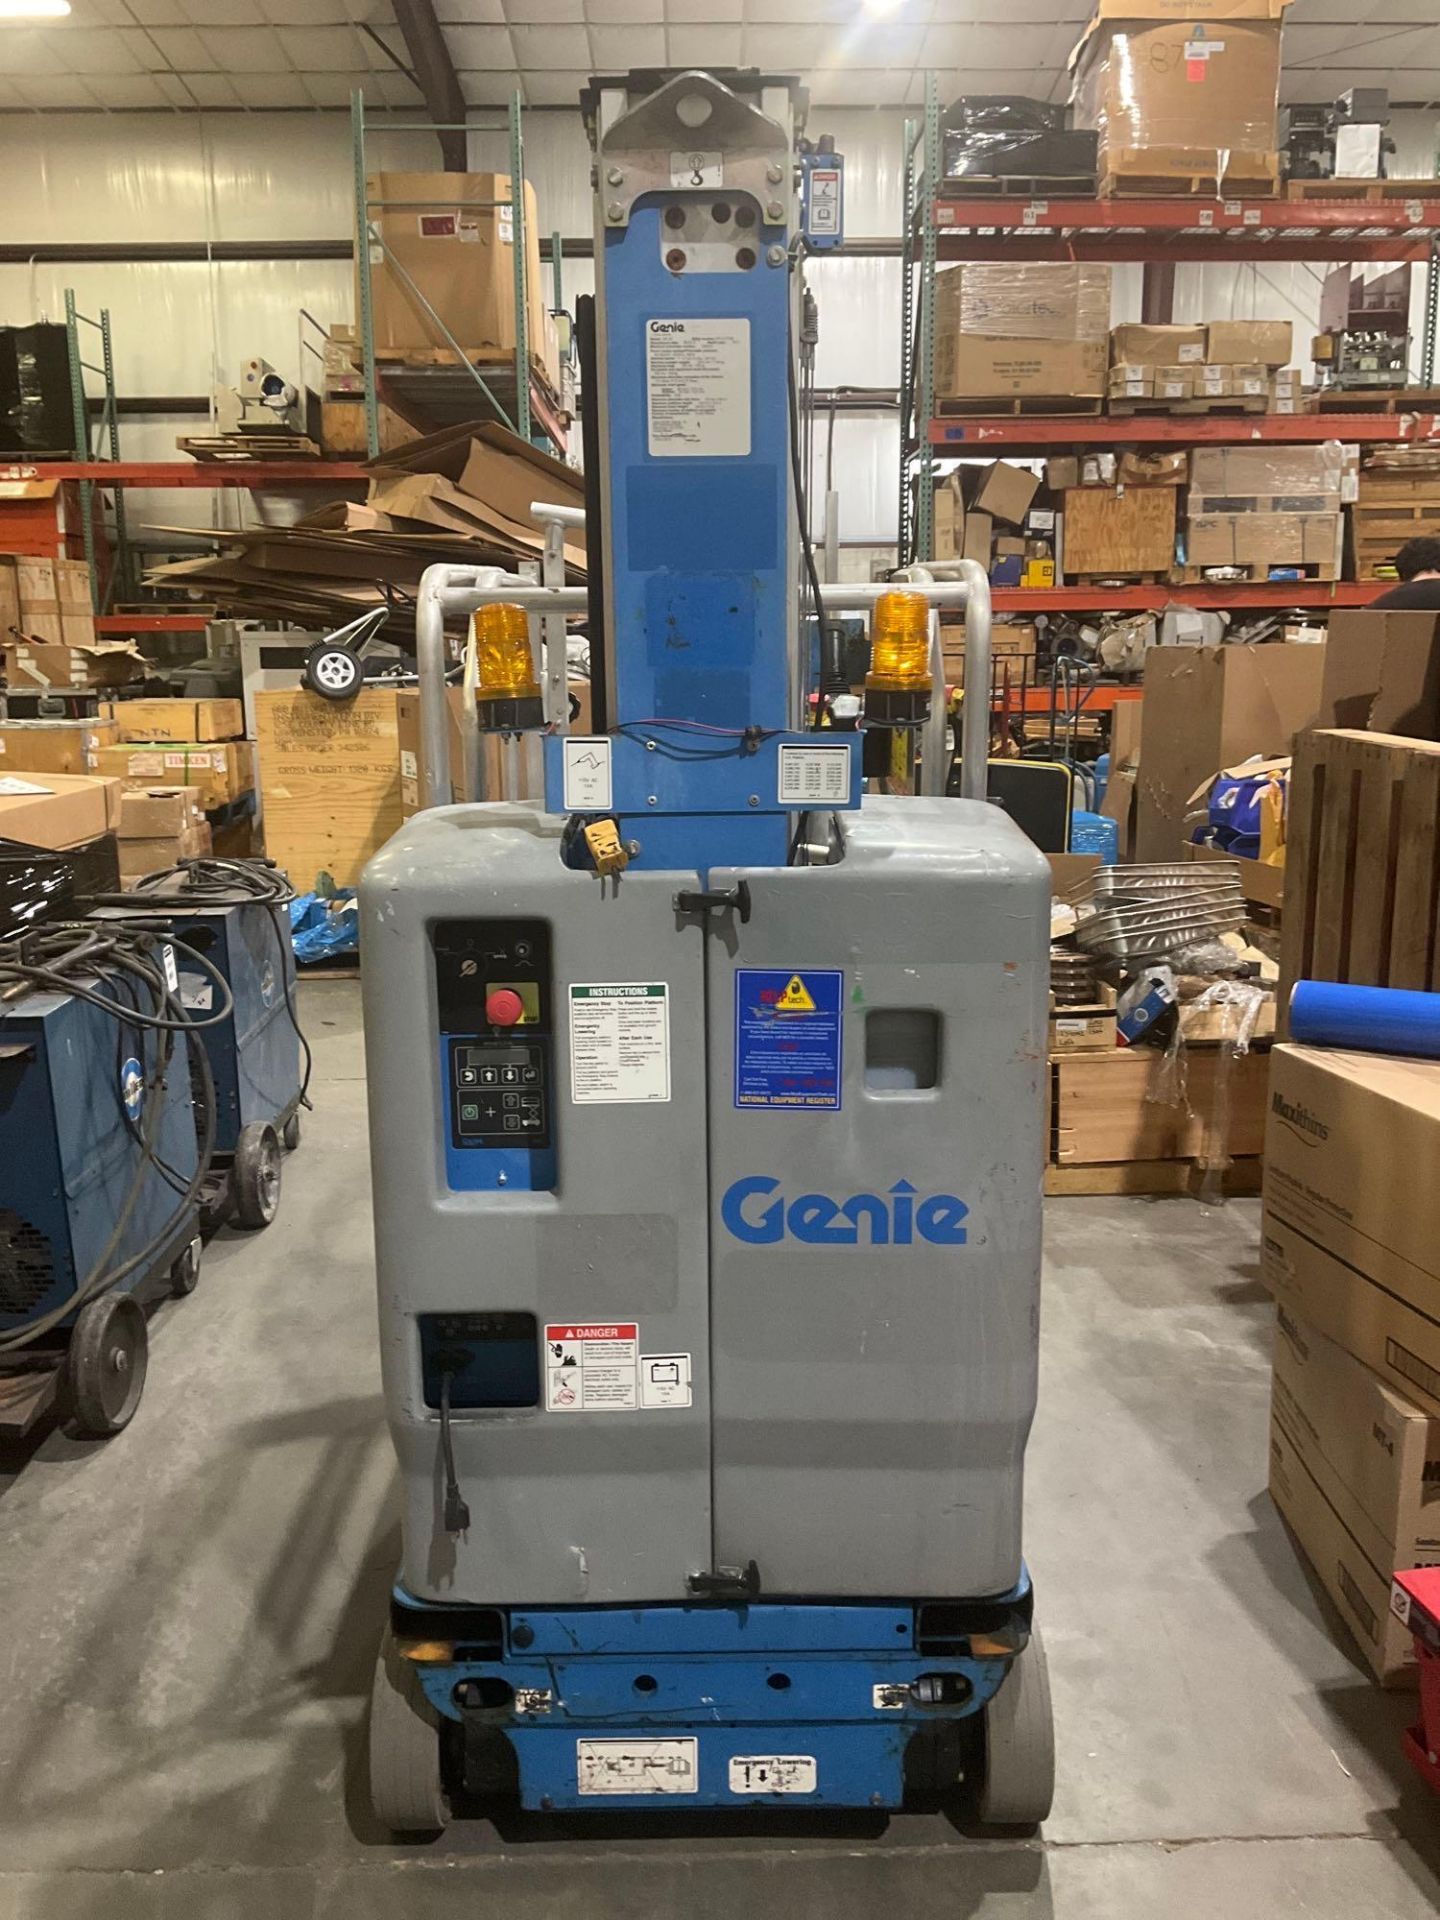 GENIE MANLIFT MODEL GR-20, ELECTRIC, APPROX MAX PLATFORM HEIGHT 20FT, NON MARKING TIRES, BUILT IN BA - Image 5 of 13